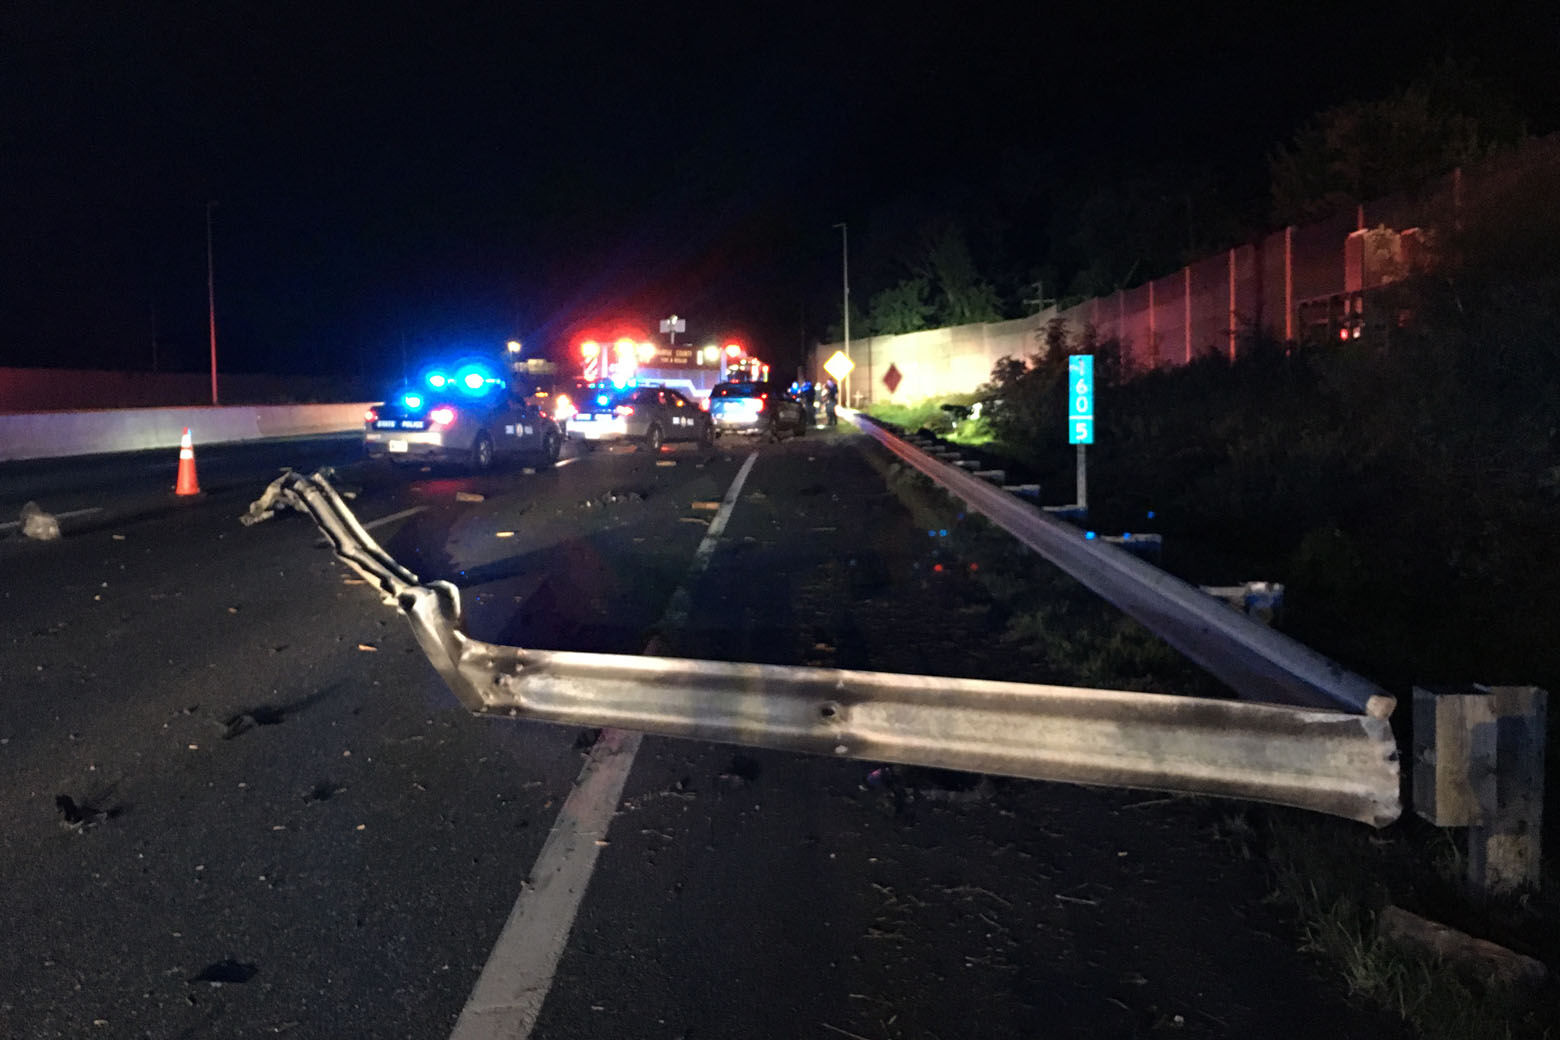 Image of a wrecked car rail and police lights on a dark road